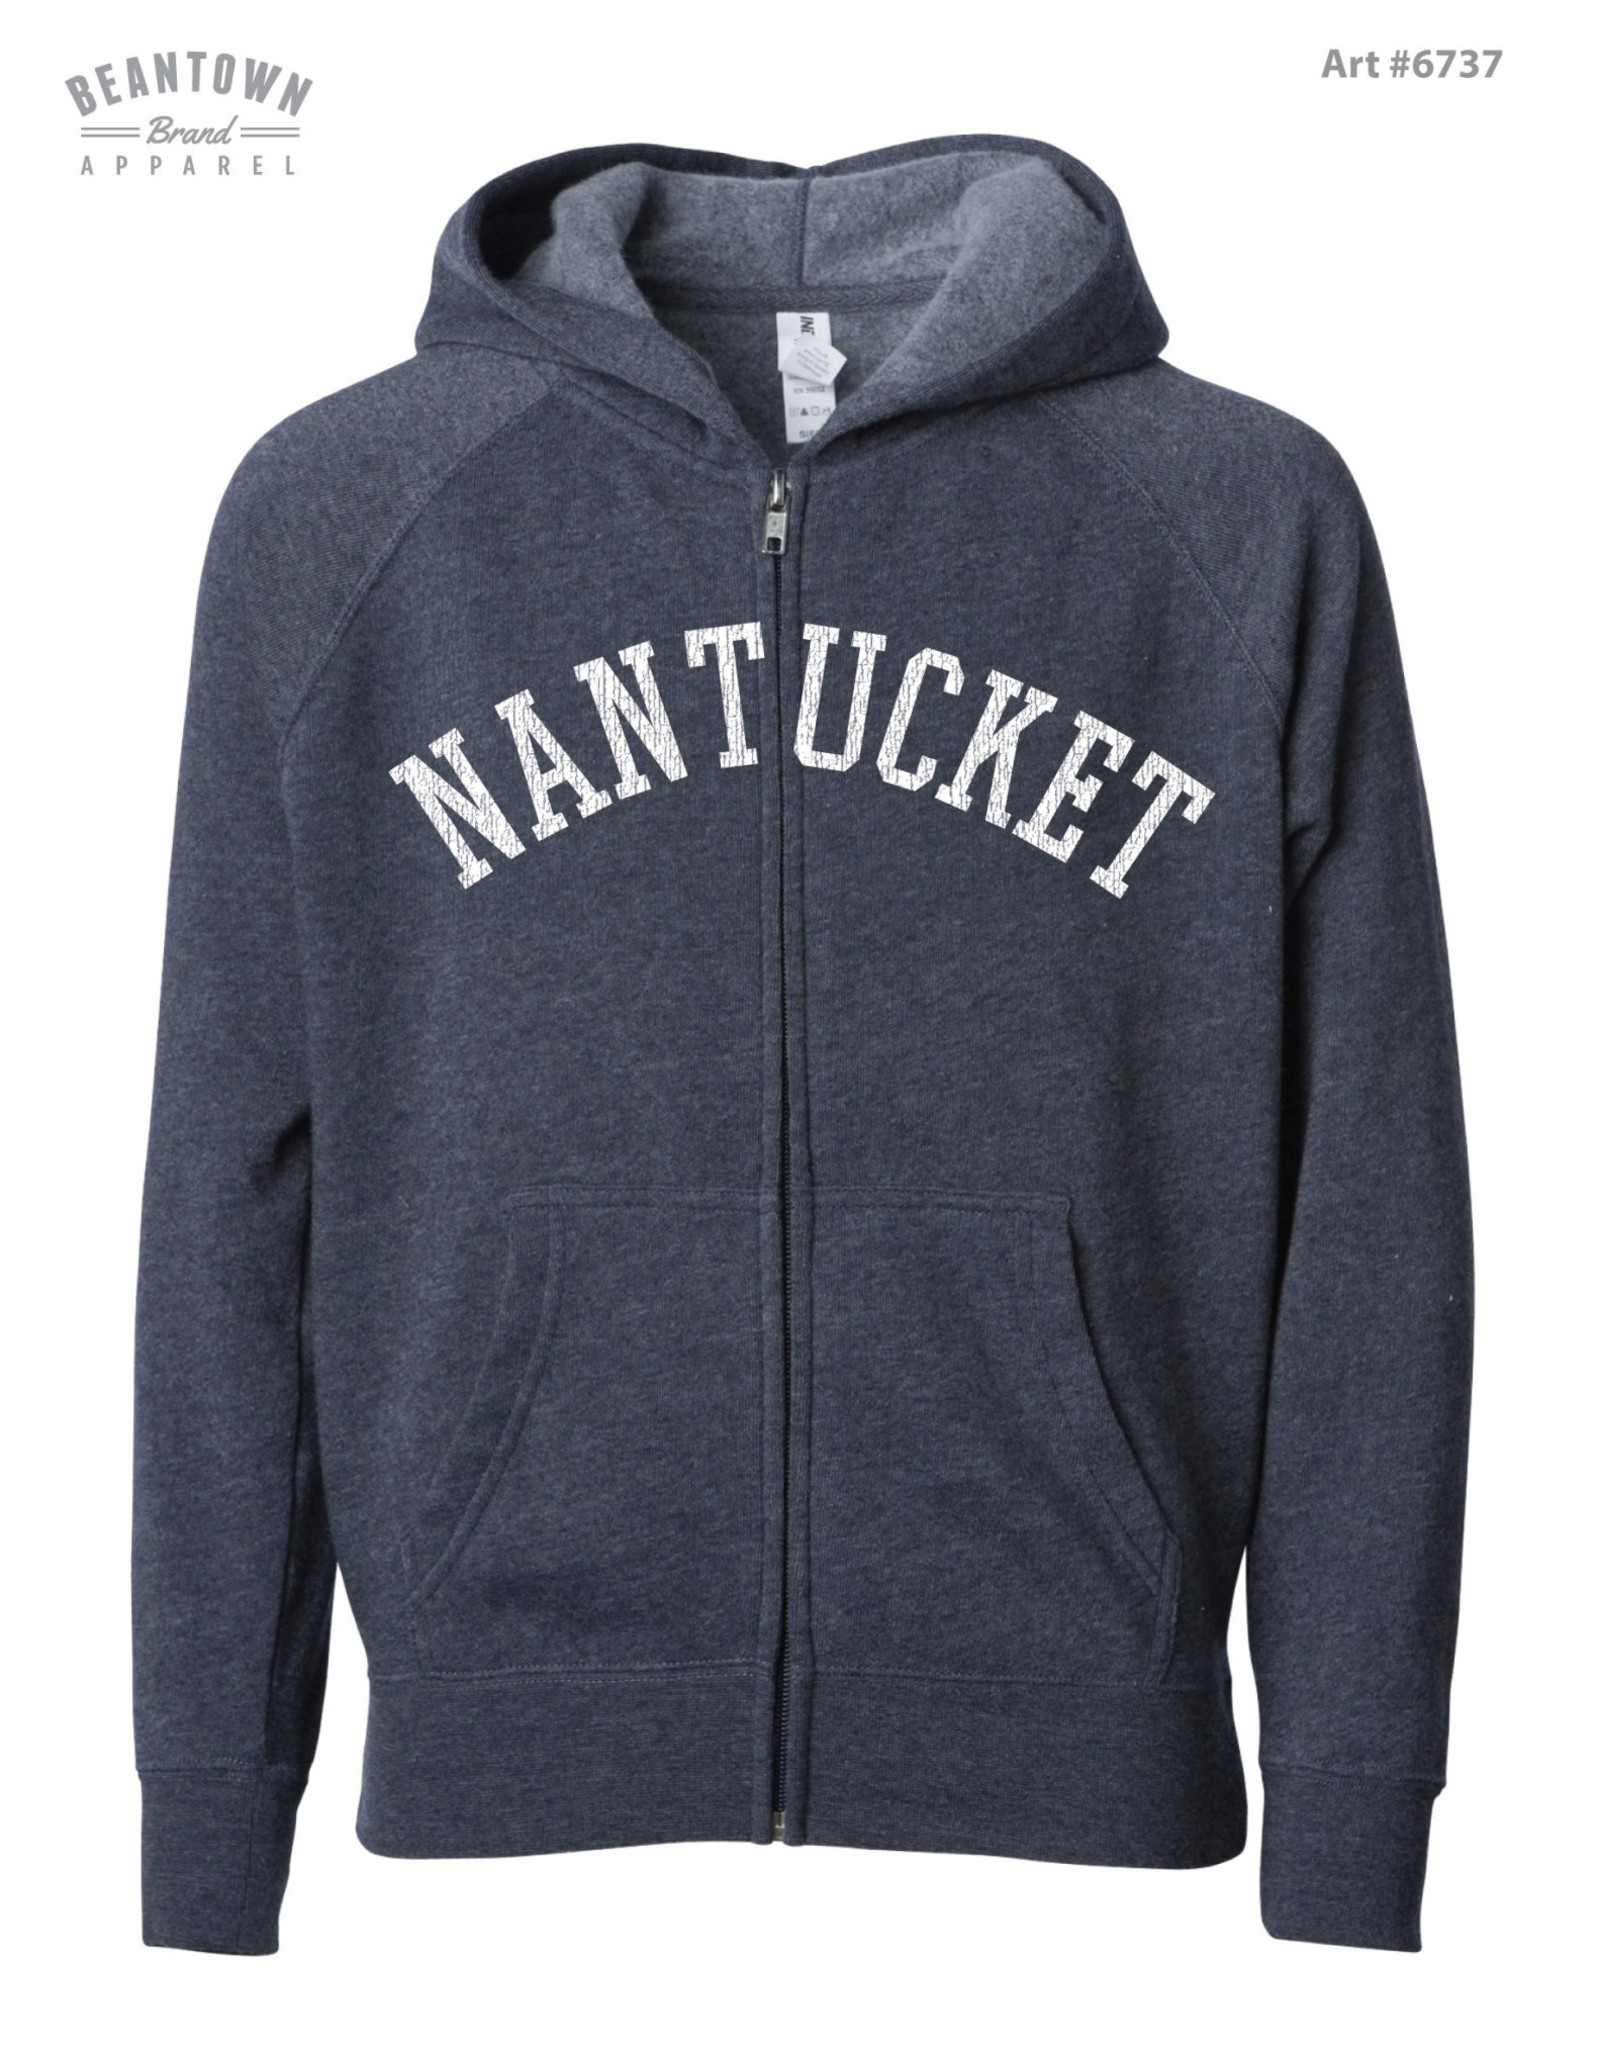 Beantown Independent Youth Full Zip Hoodie